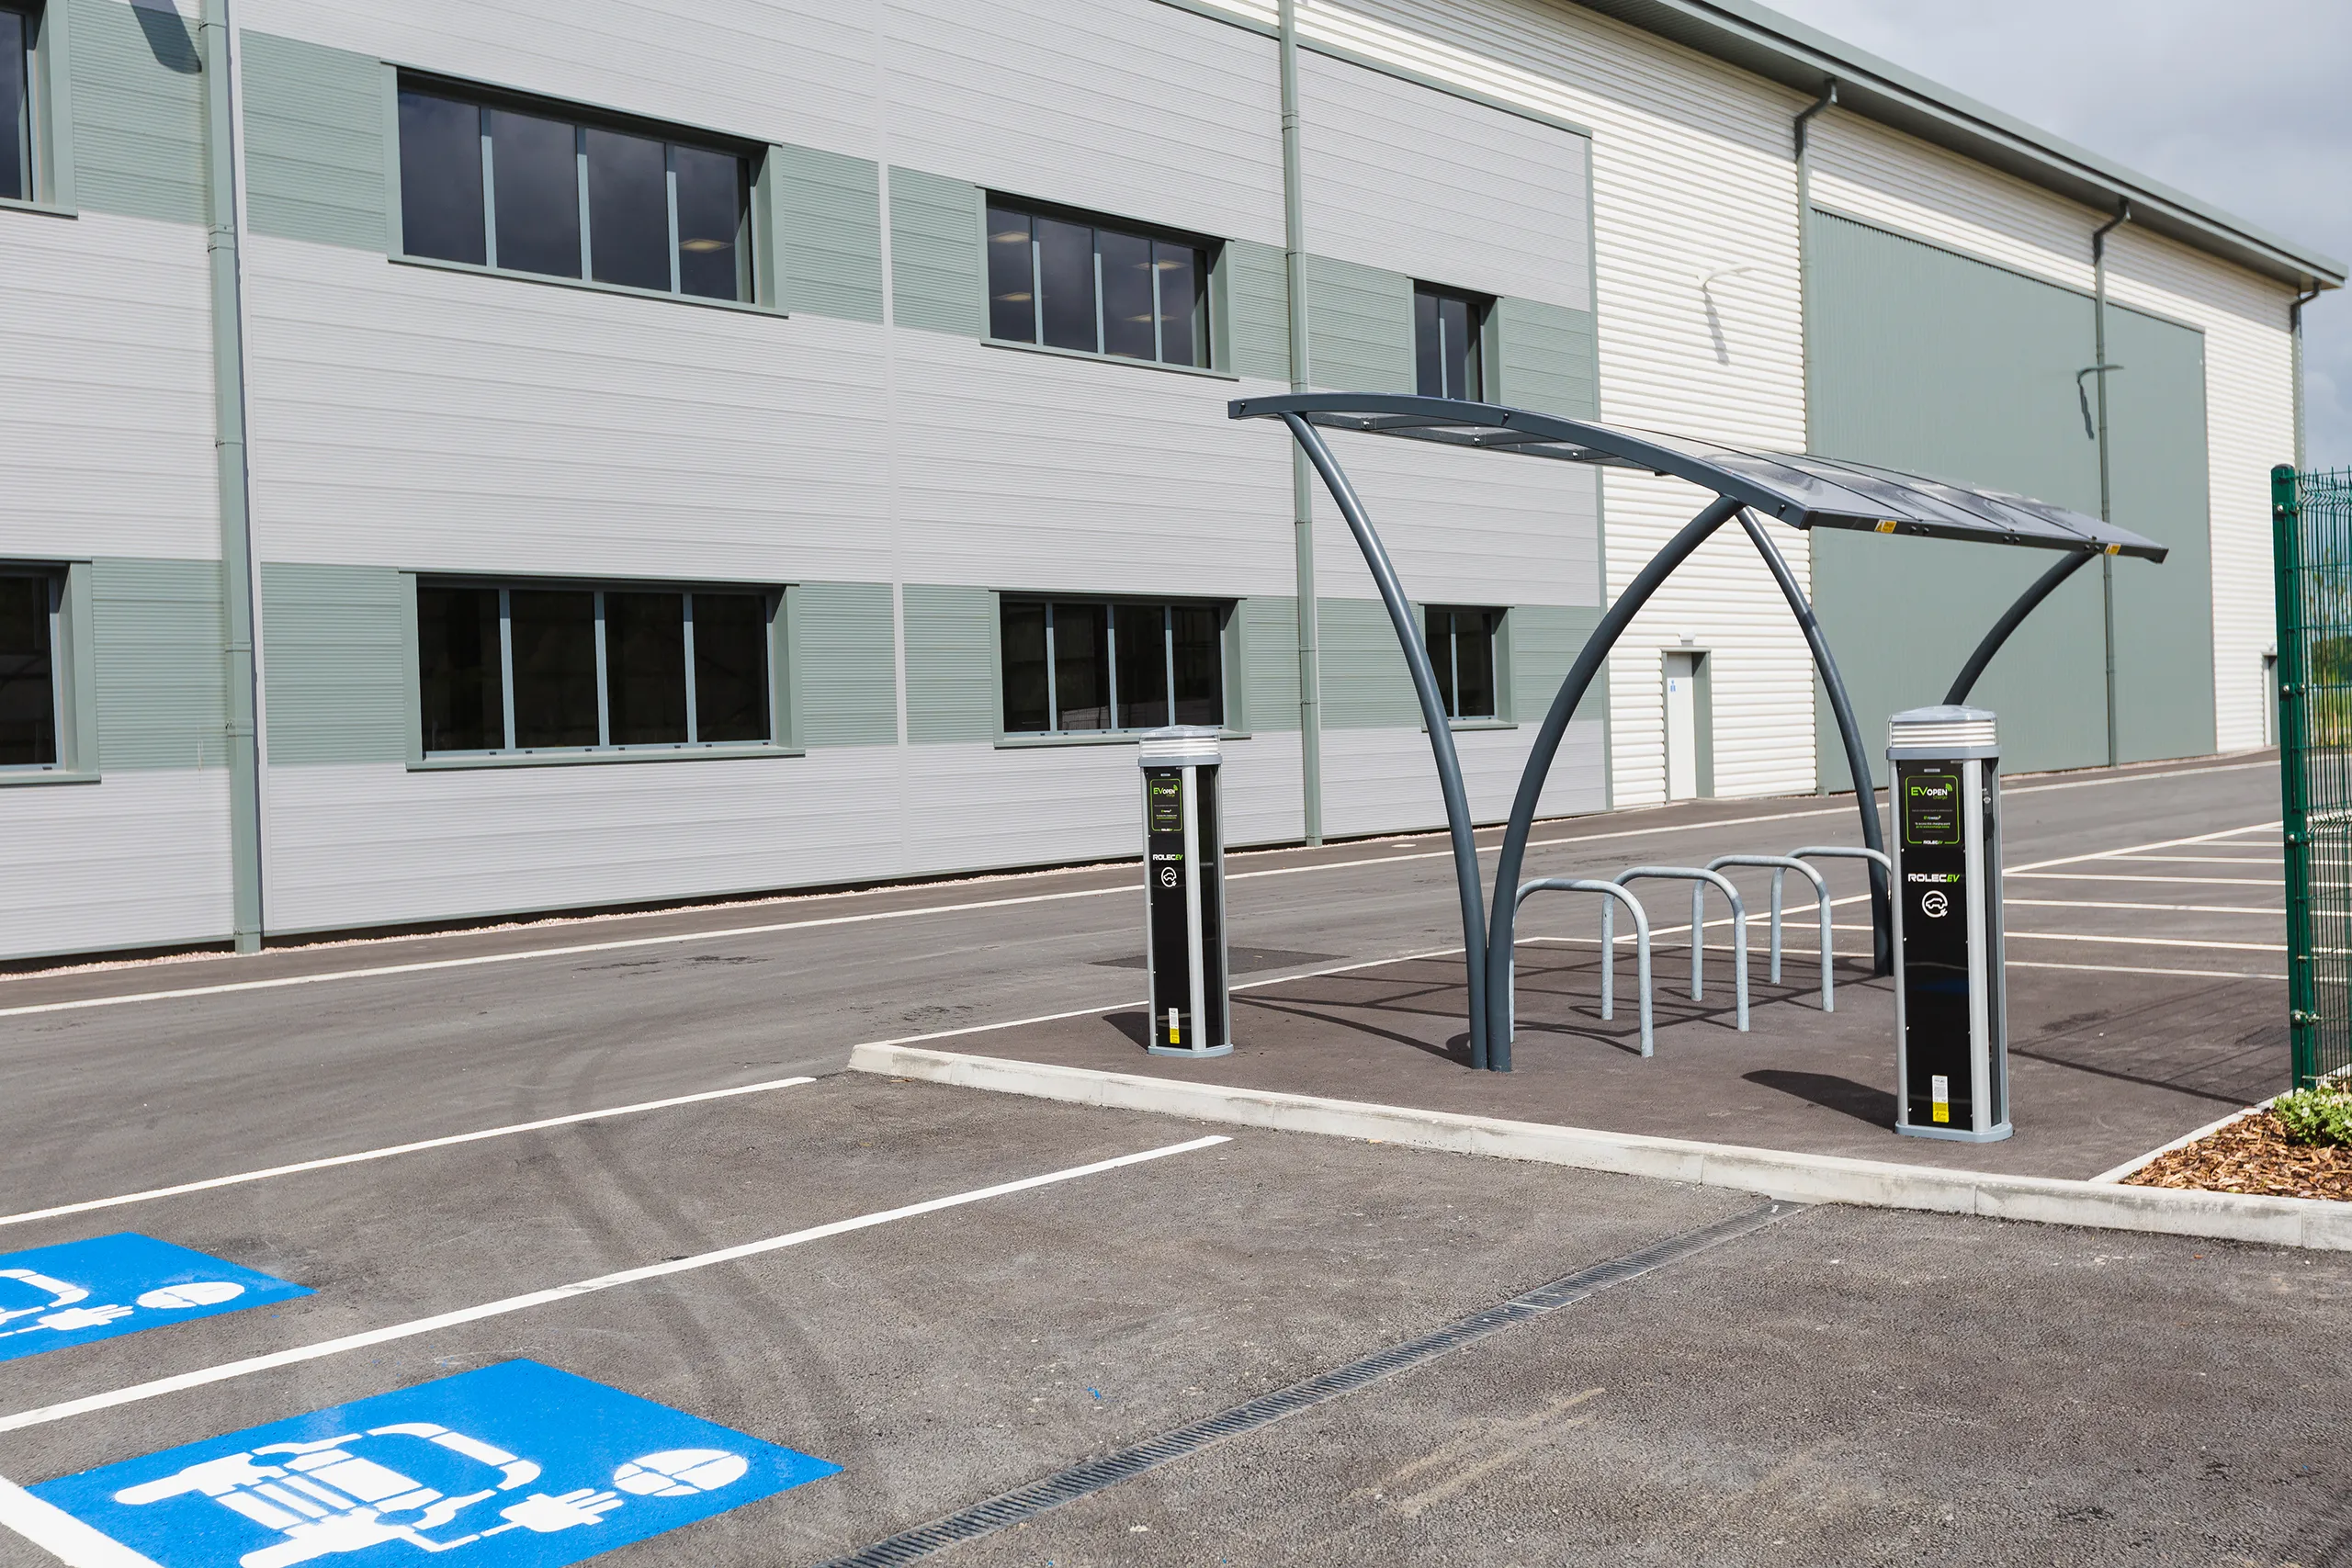 Stoke Central electric charging